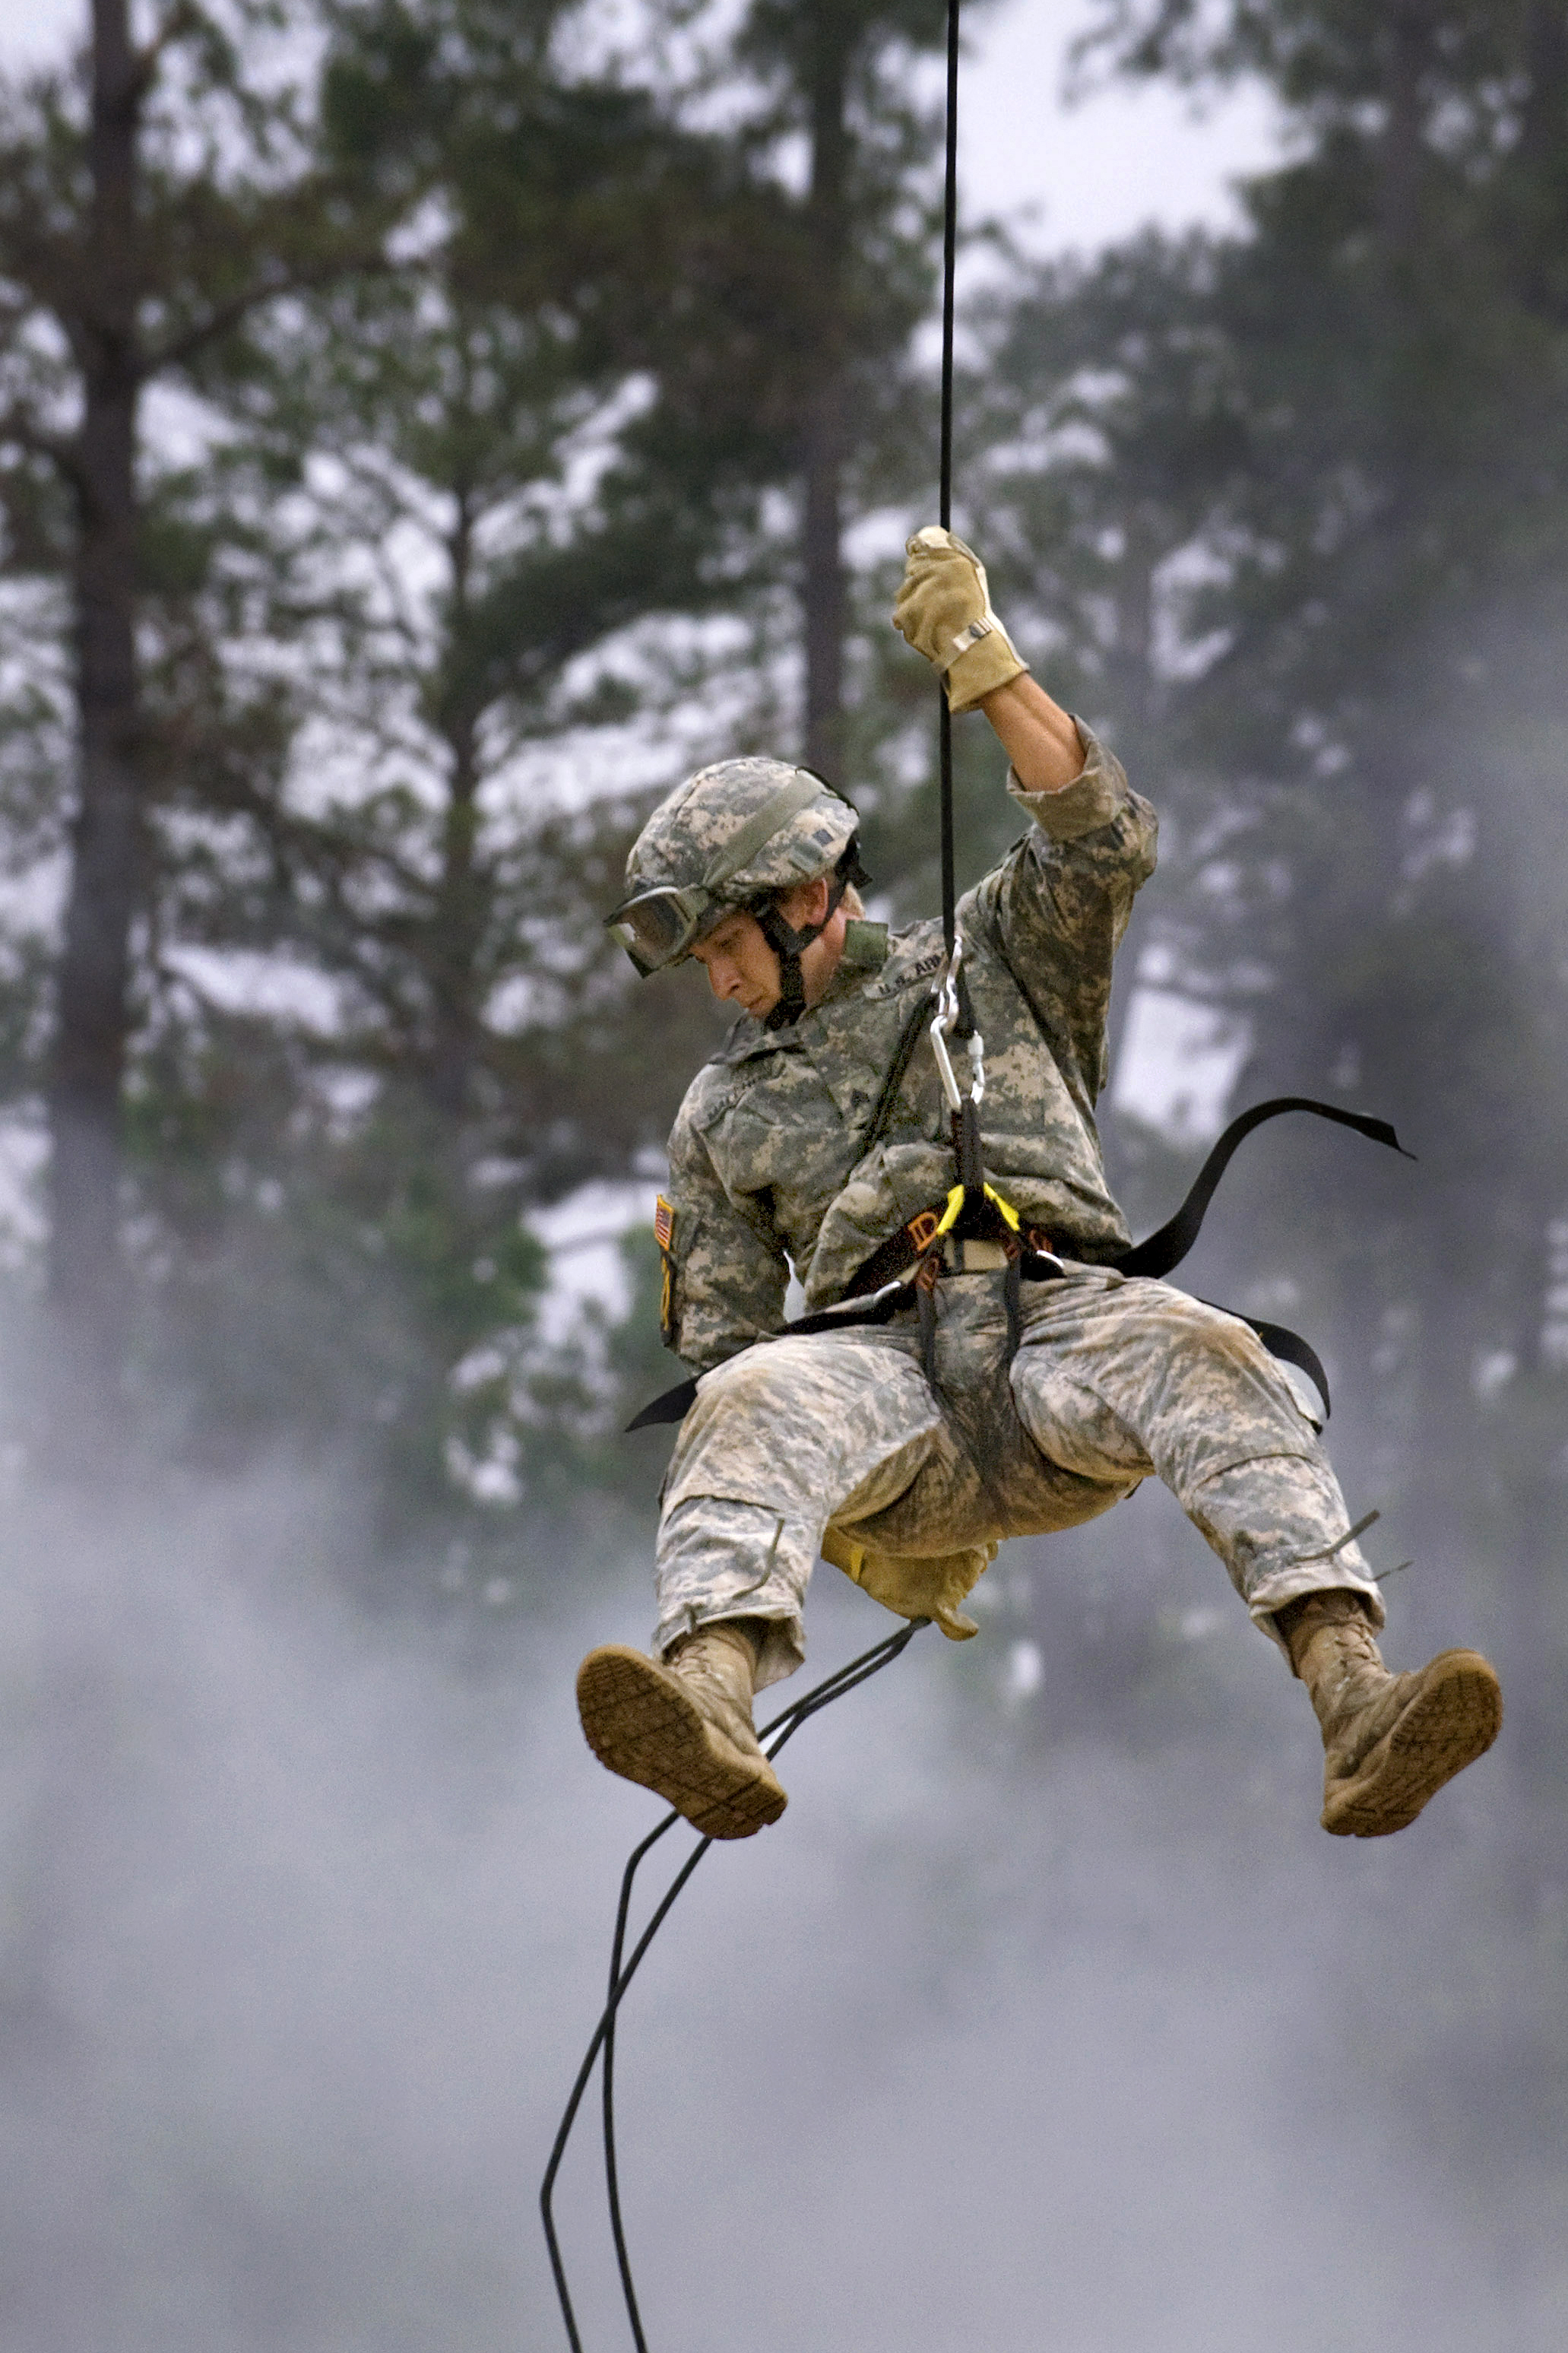 U.S. Army Sgt. Michael Malchow descends to the bottom of the rappel tower  as part of